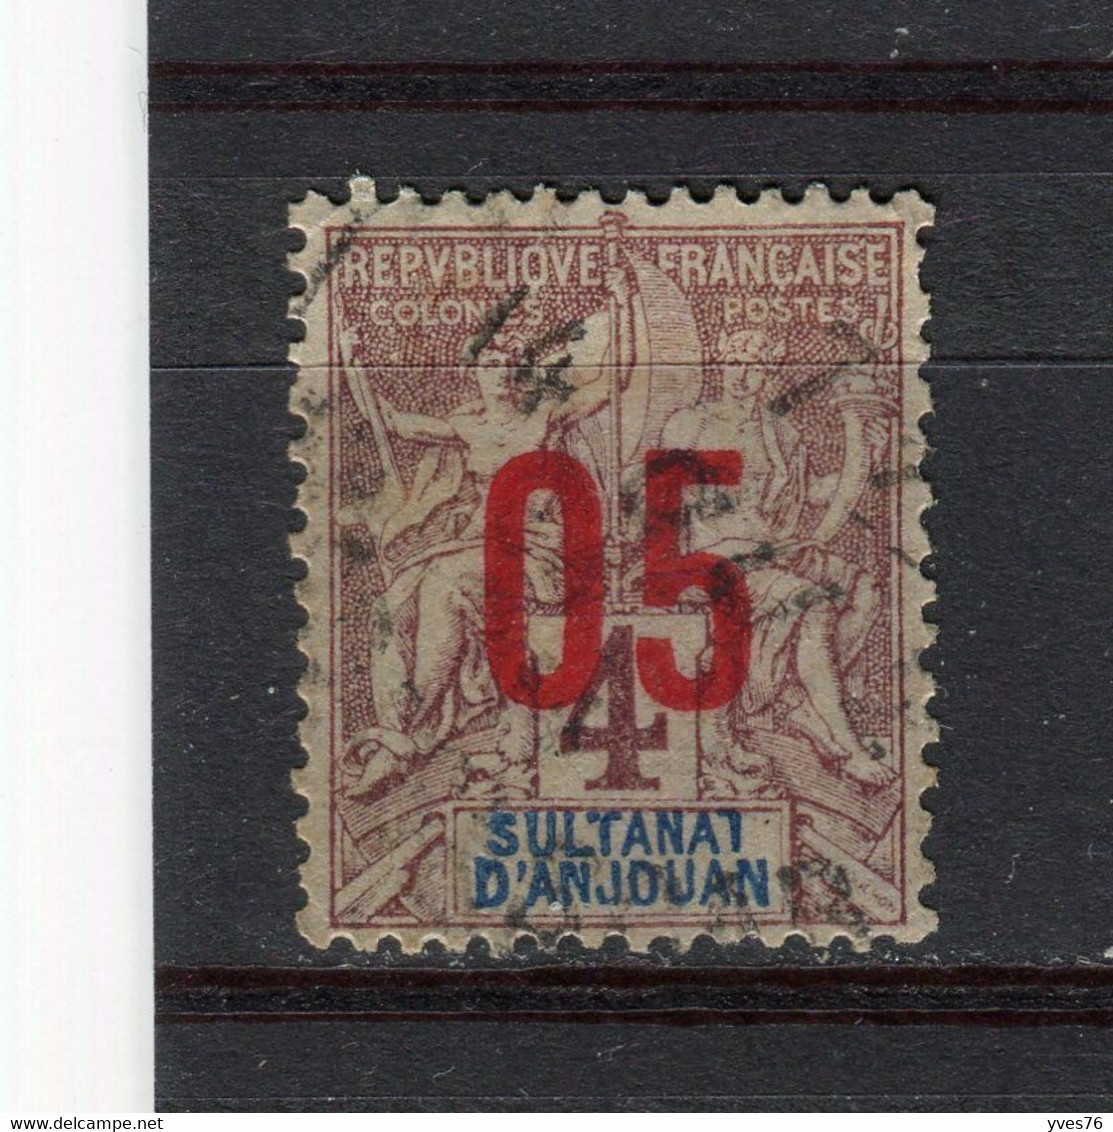 ANJOUAN - Y&T N° 21° - Type Groupe - Used Stamps